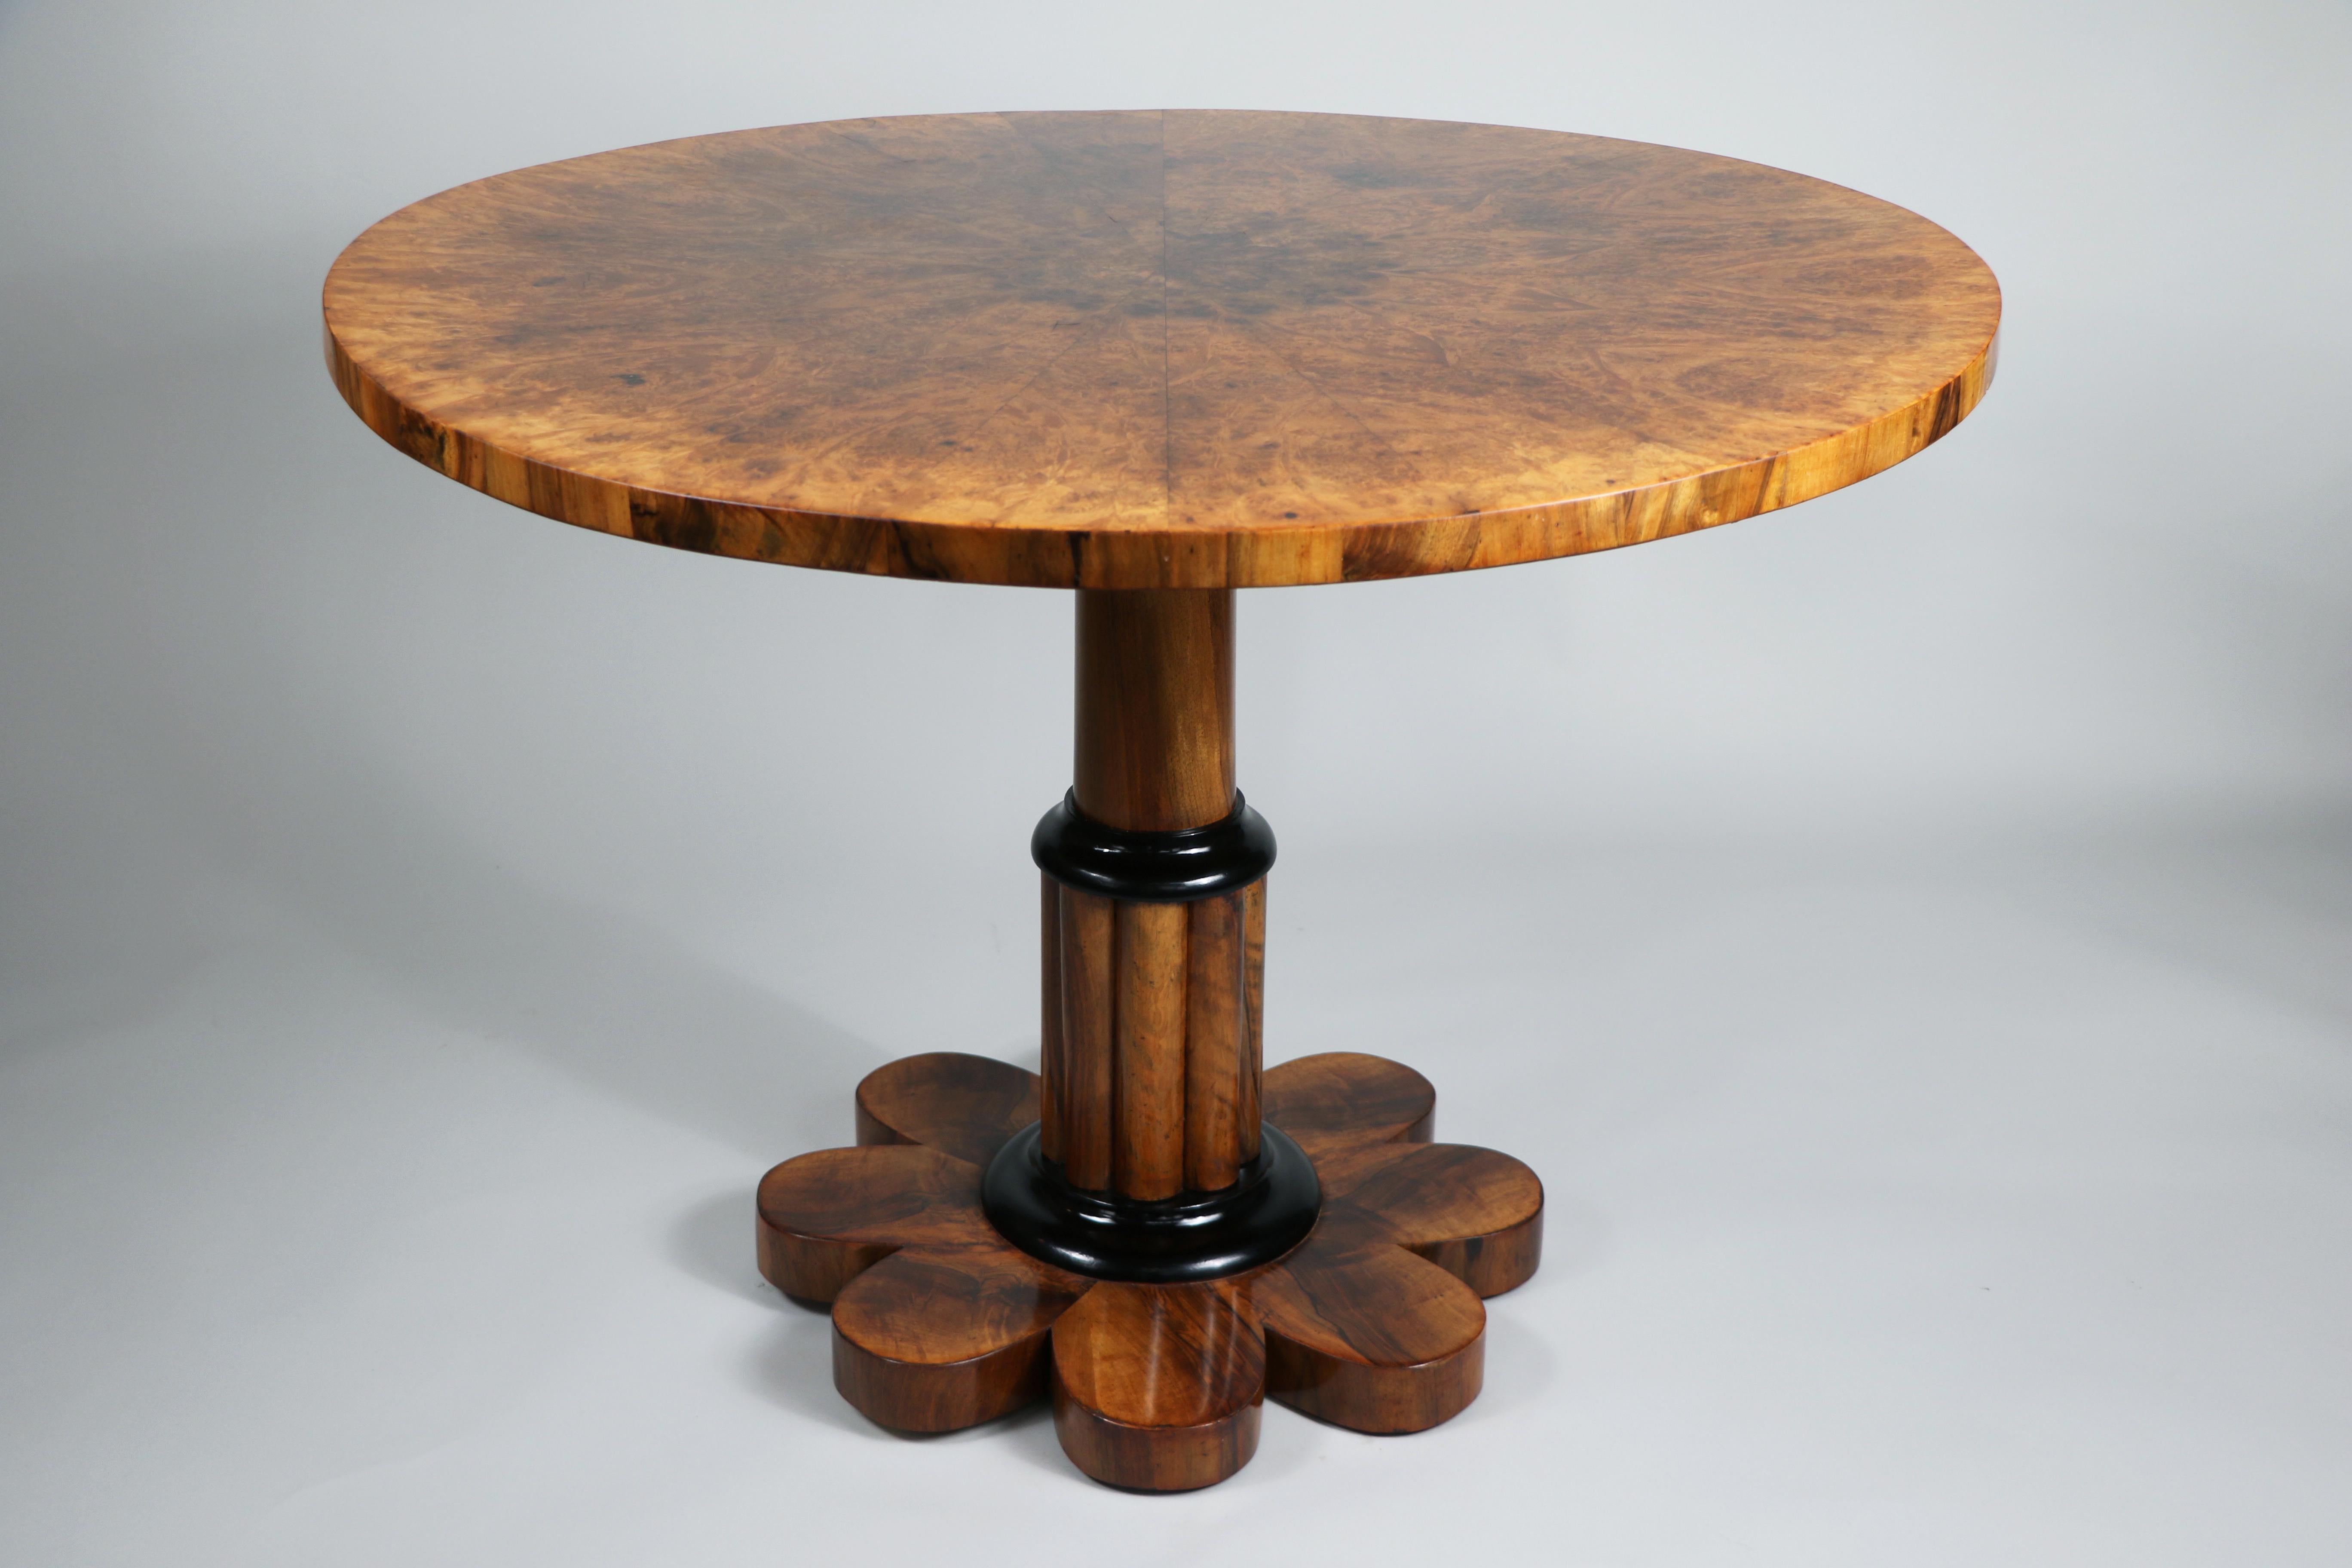 Hello,
This stunning Biedermeier walnut pedestal table is the best example of top-quality Viennese piece from circa 1820-25.

Viennese Biedermeier is distinguished by their sophisticated proportions, rare and refined design and excellent